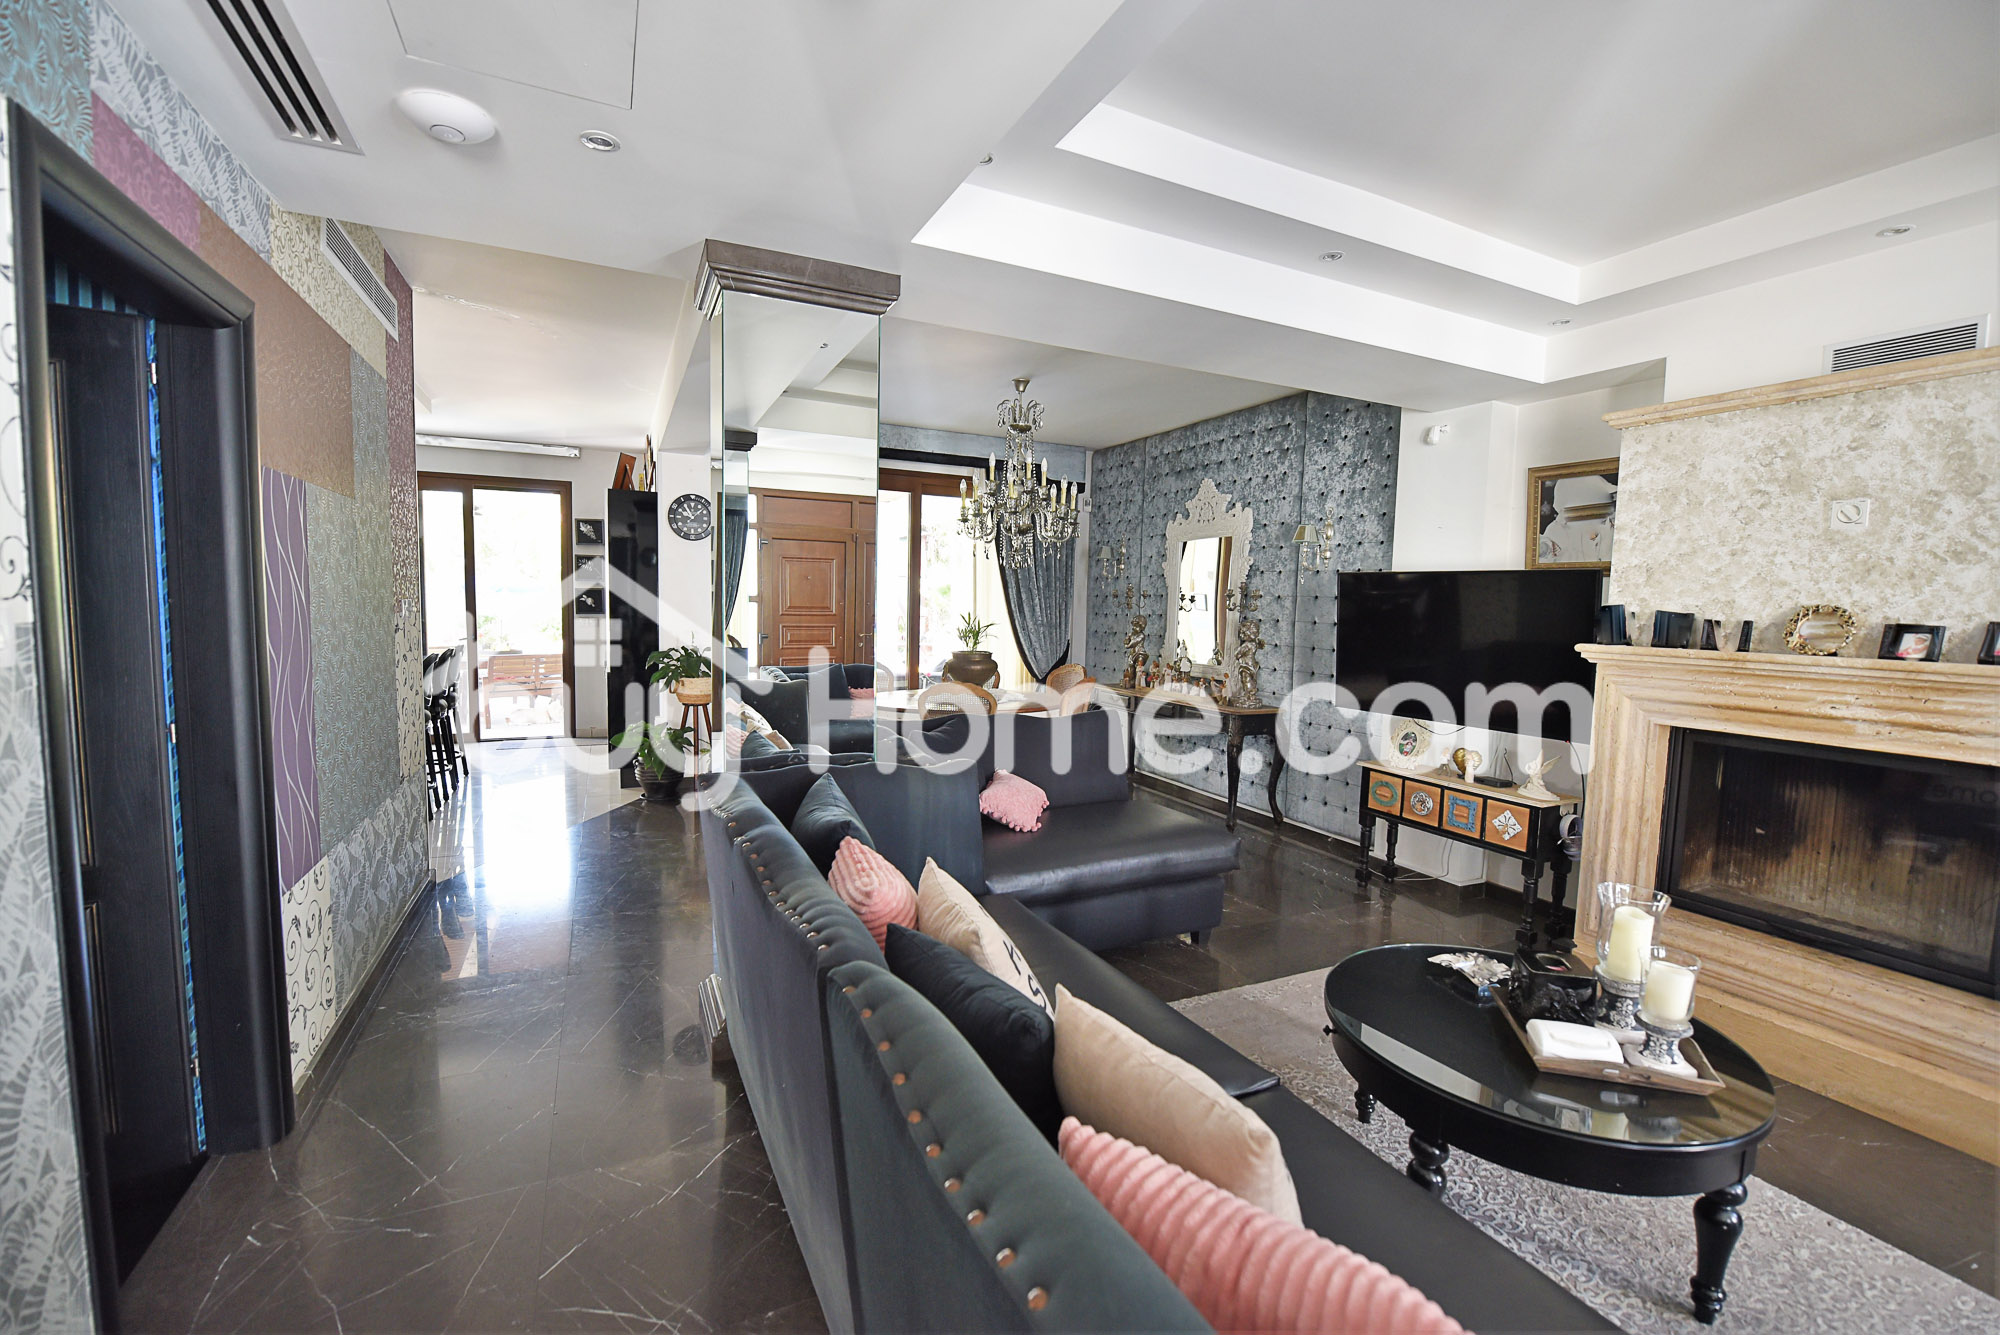 Deluxe Villa with Private Pool | BuyHome